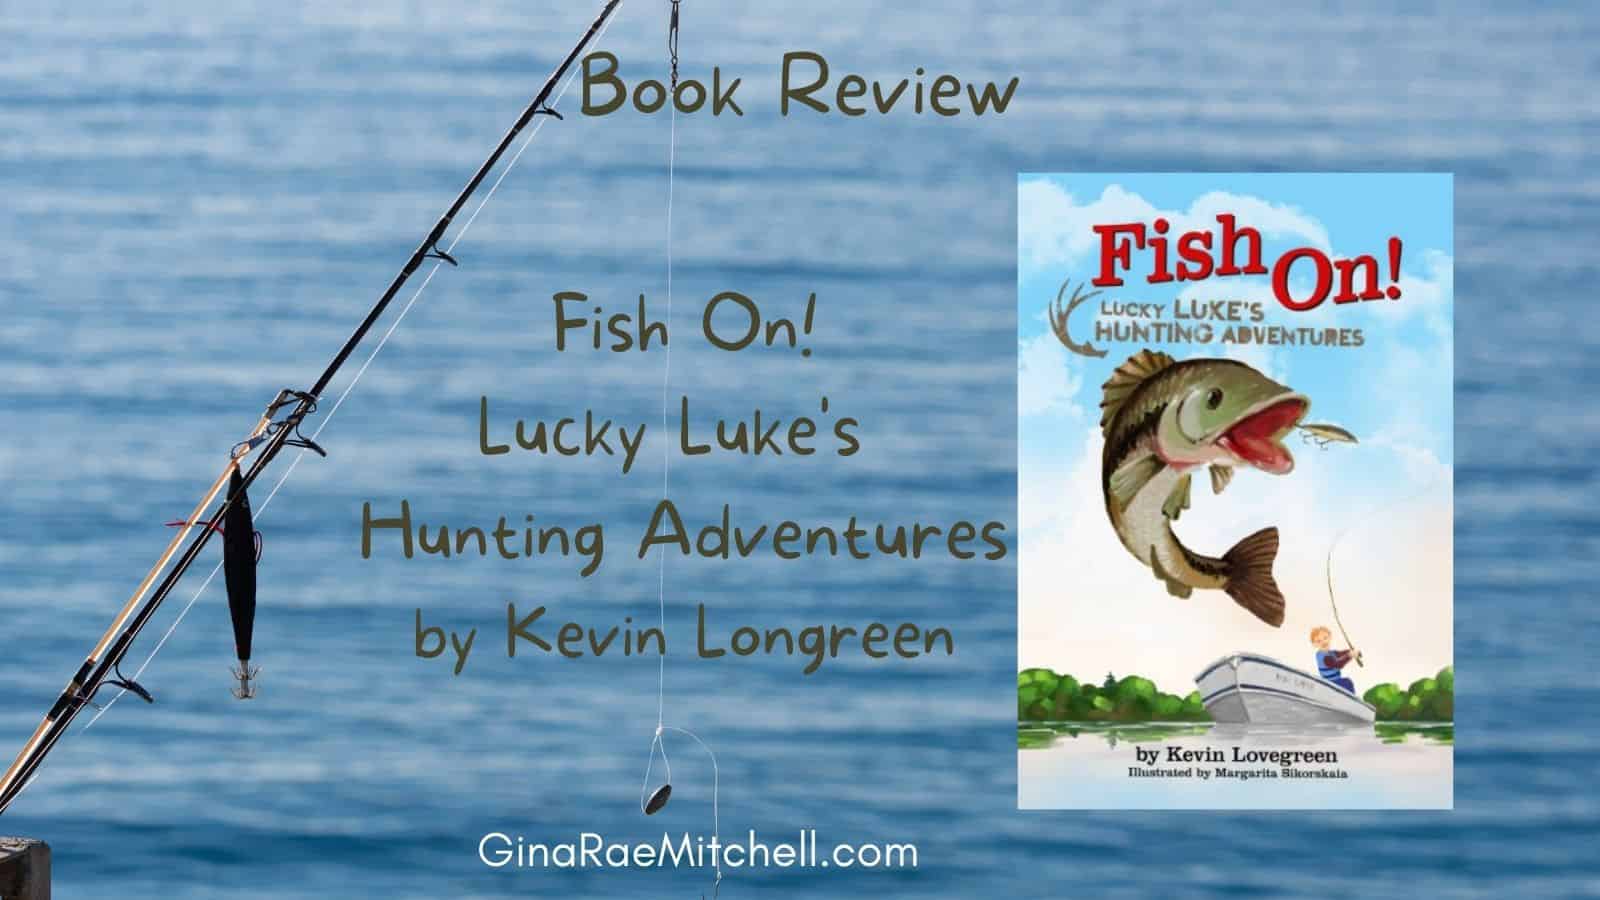 Fish On! By Kevin Lovegreen (Part Of The Lucky Luke's Hunting